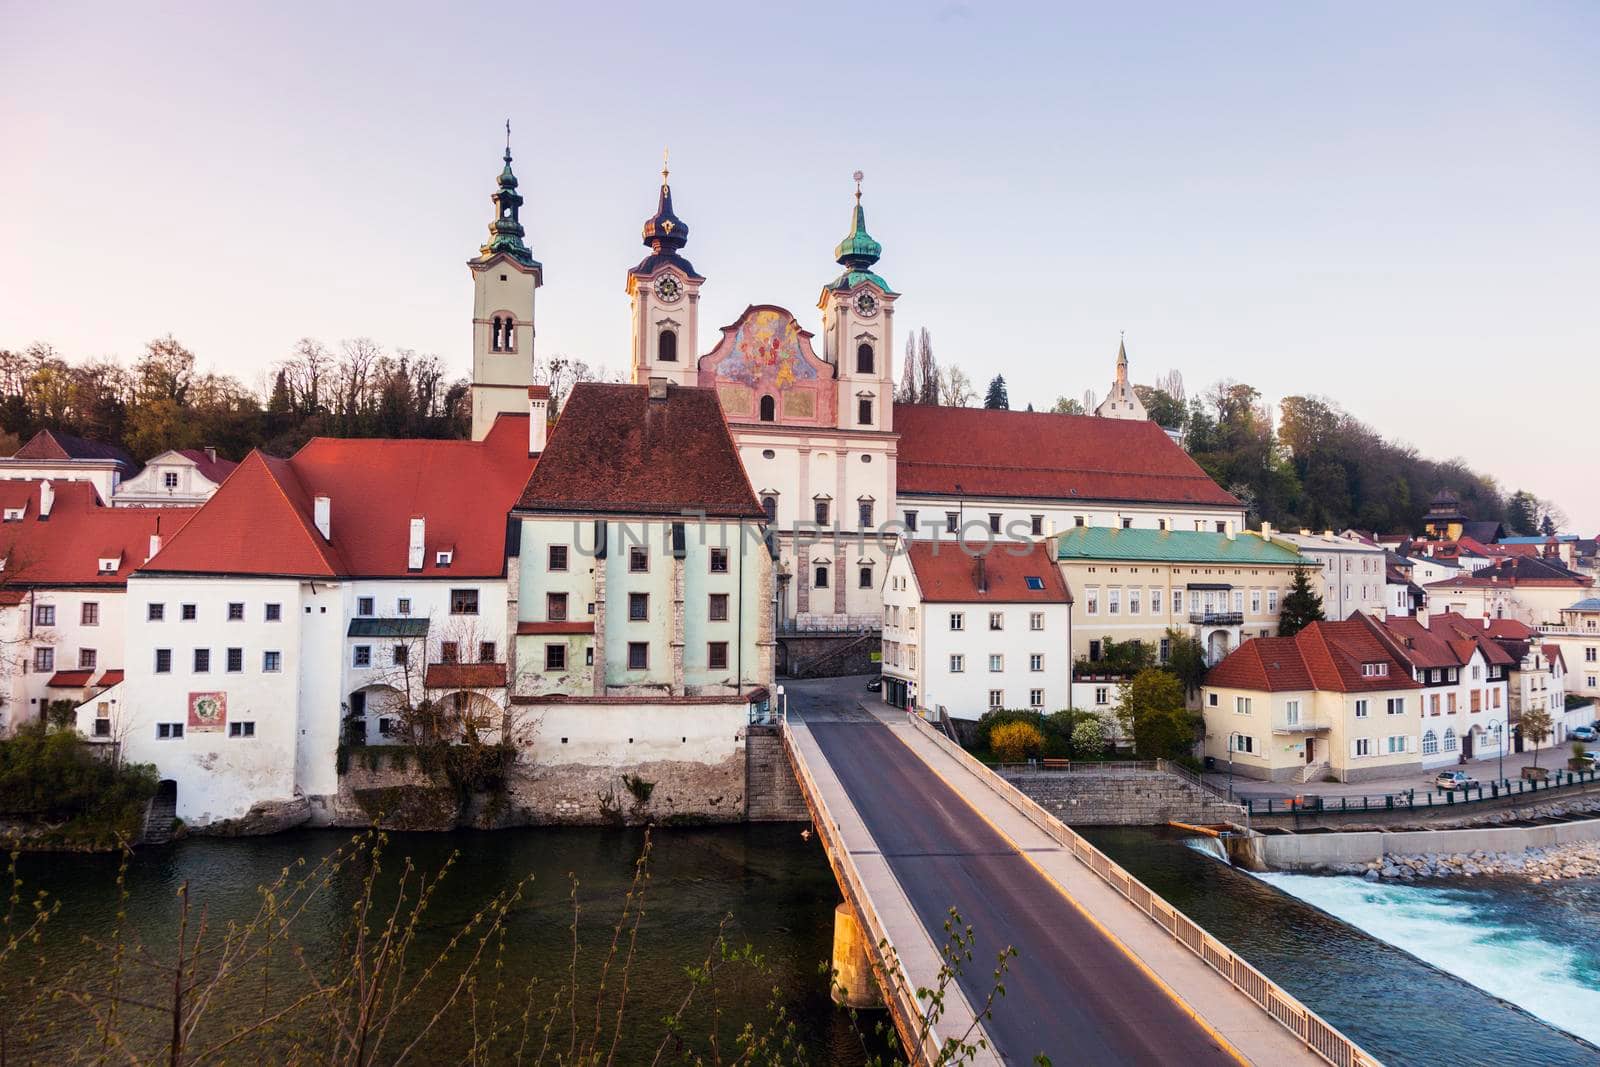 Steyr panorama with St. Michael's Church by benkrut